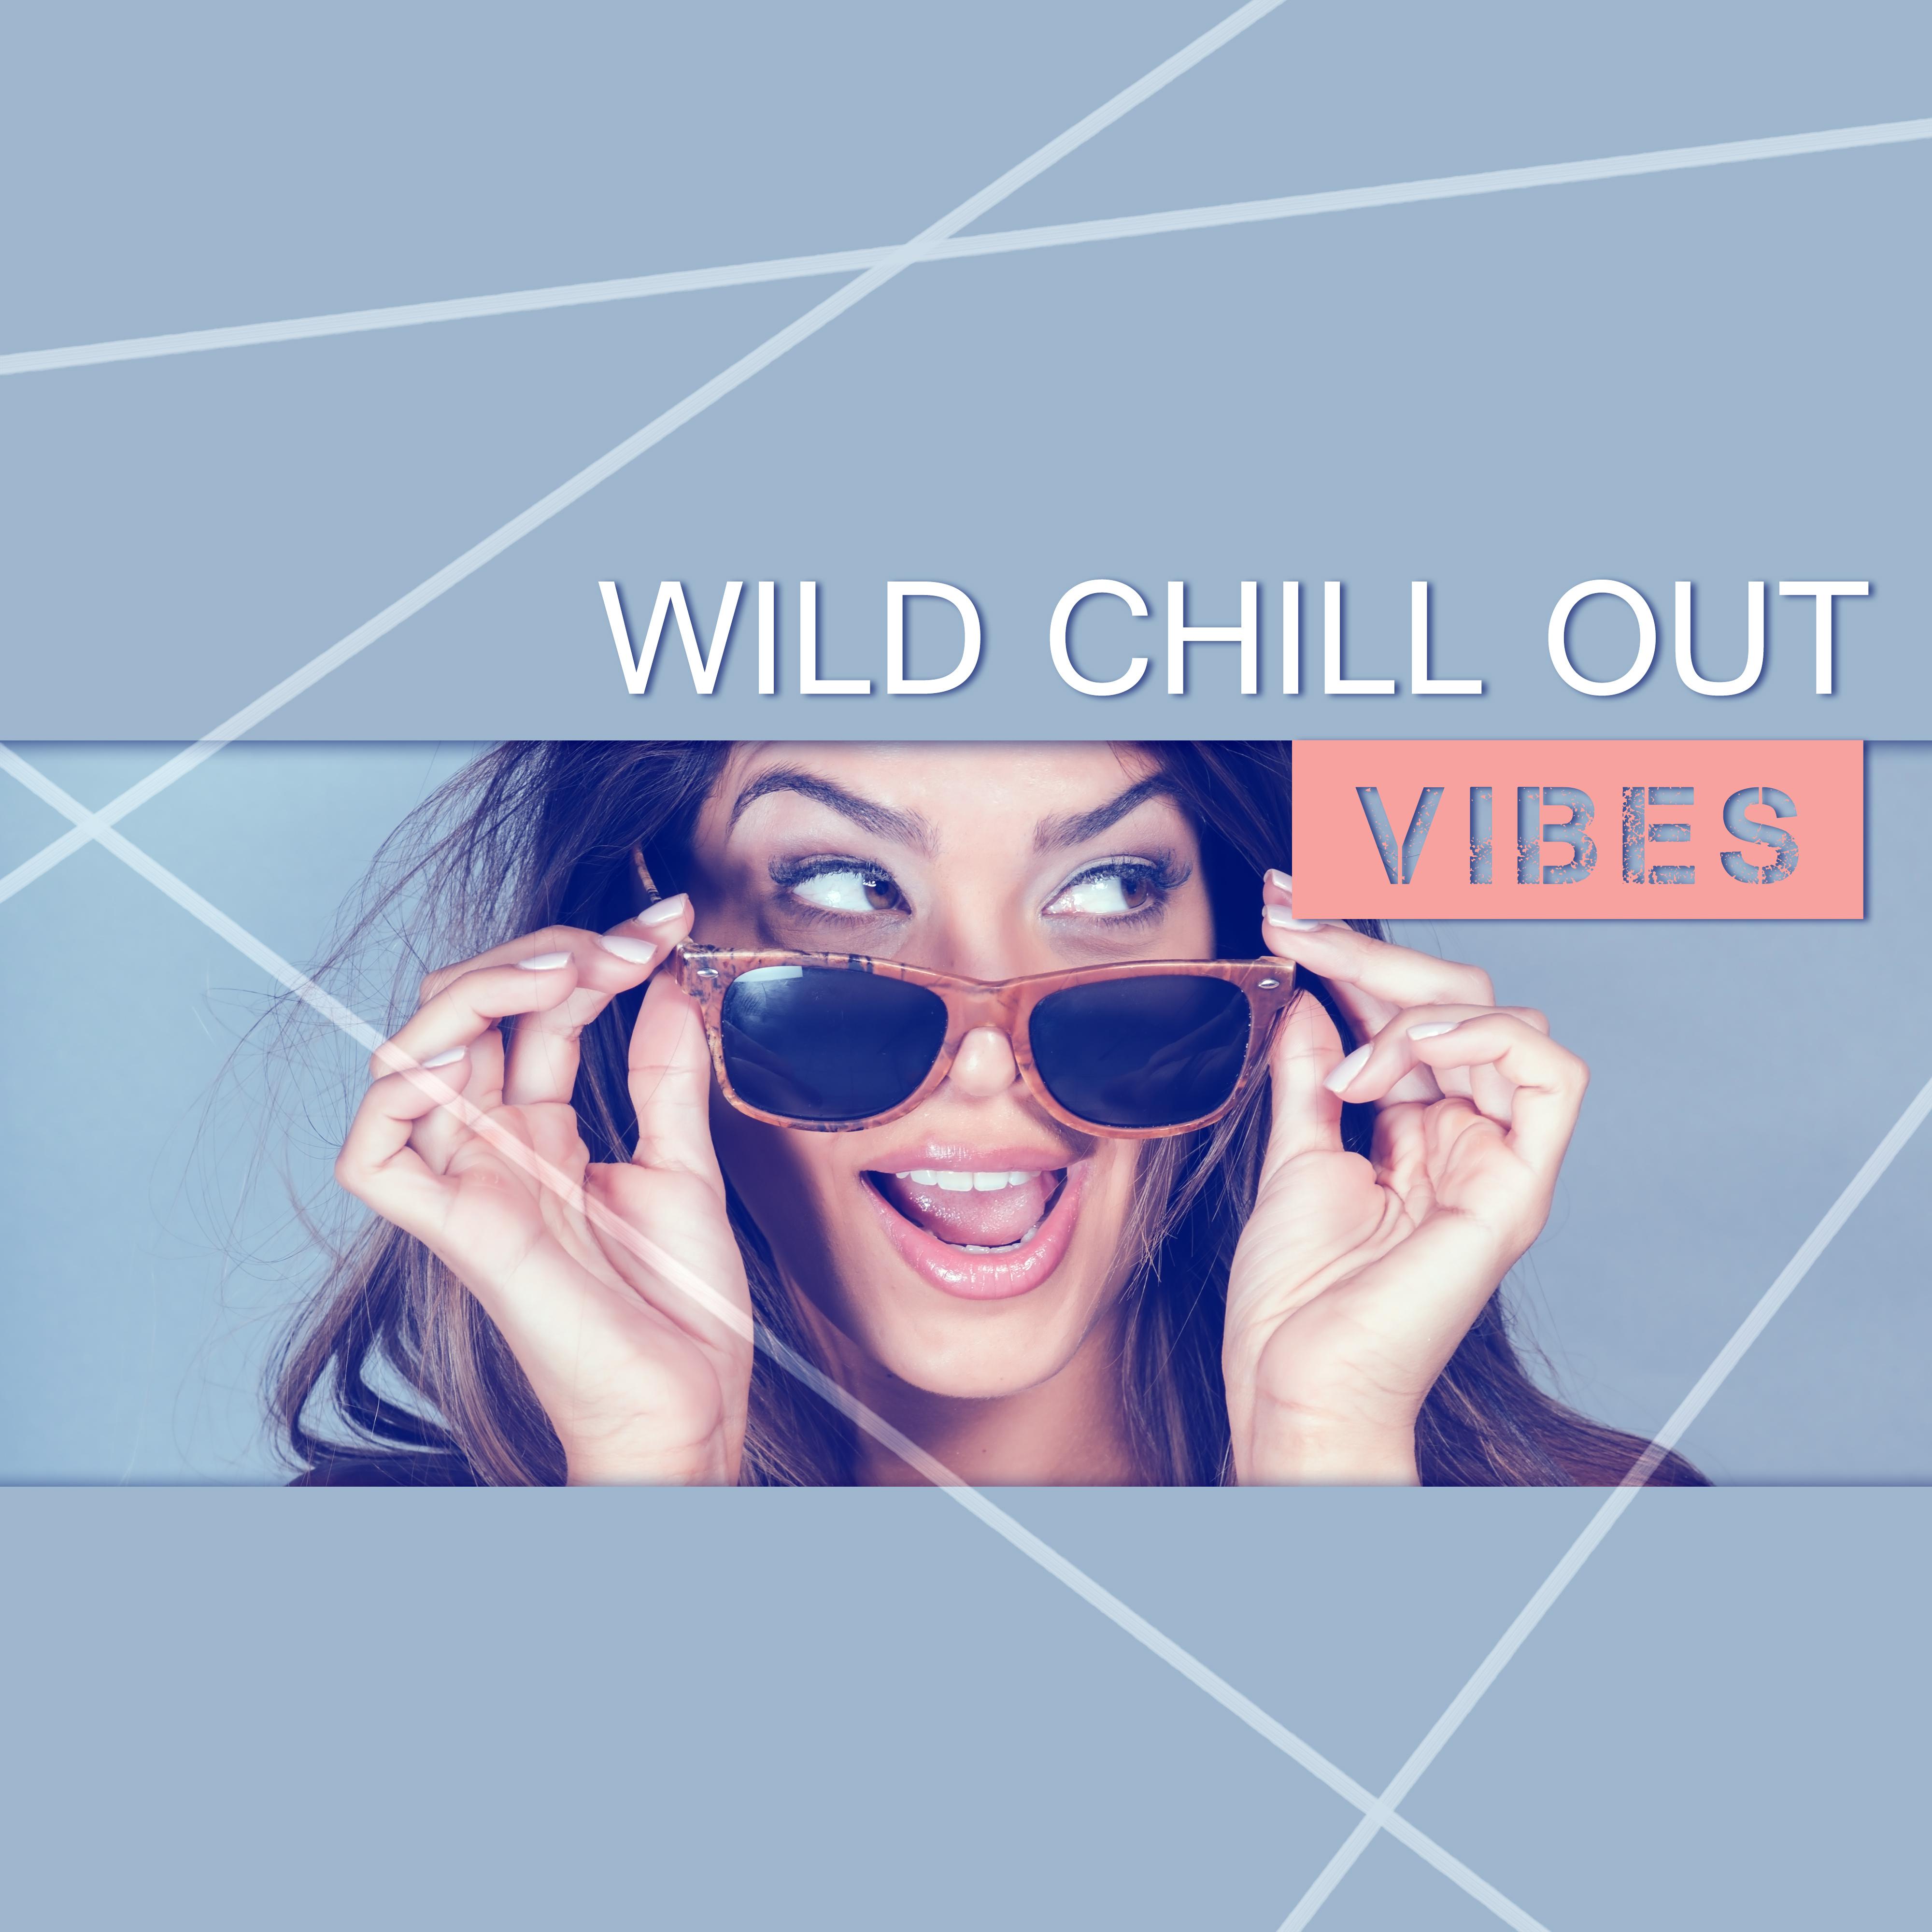 Wild Chill Out Vibes - Easy Listening Chill Out Wibes, Sunrise Chill Out Music, Summer Solstice, Beach Music, Deep Chill Tone, Holiday Chill Out